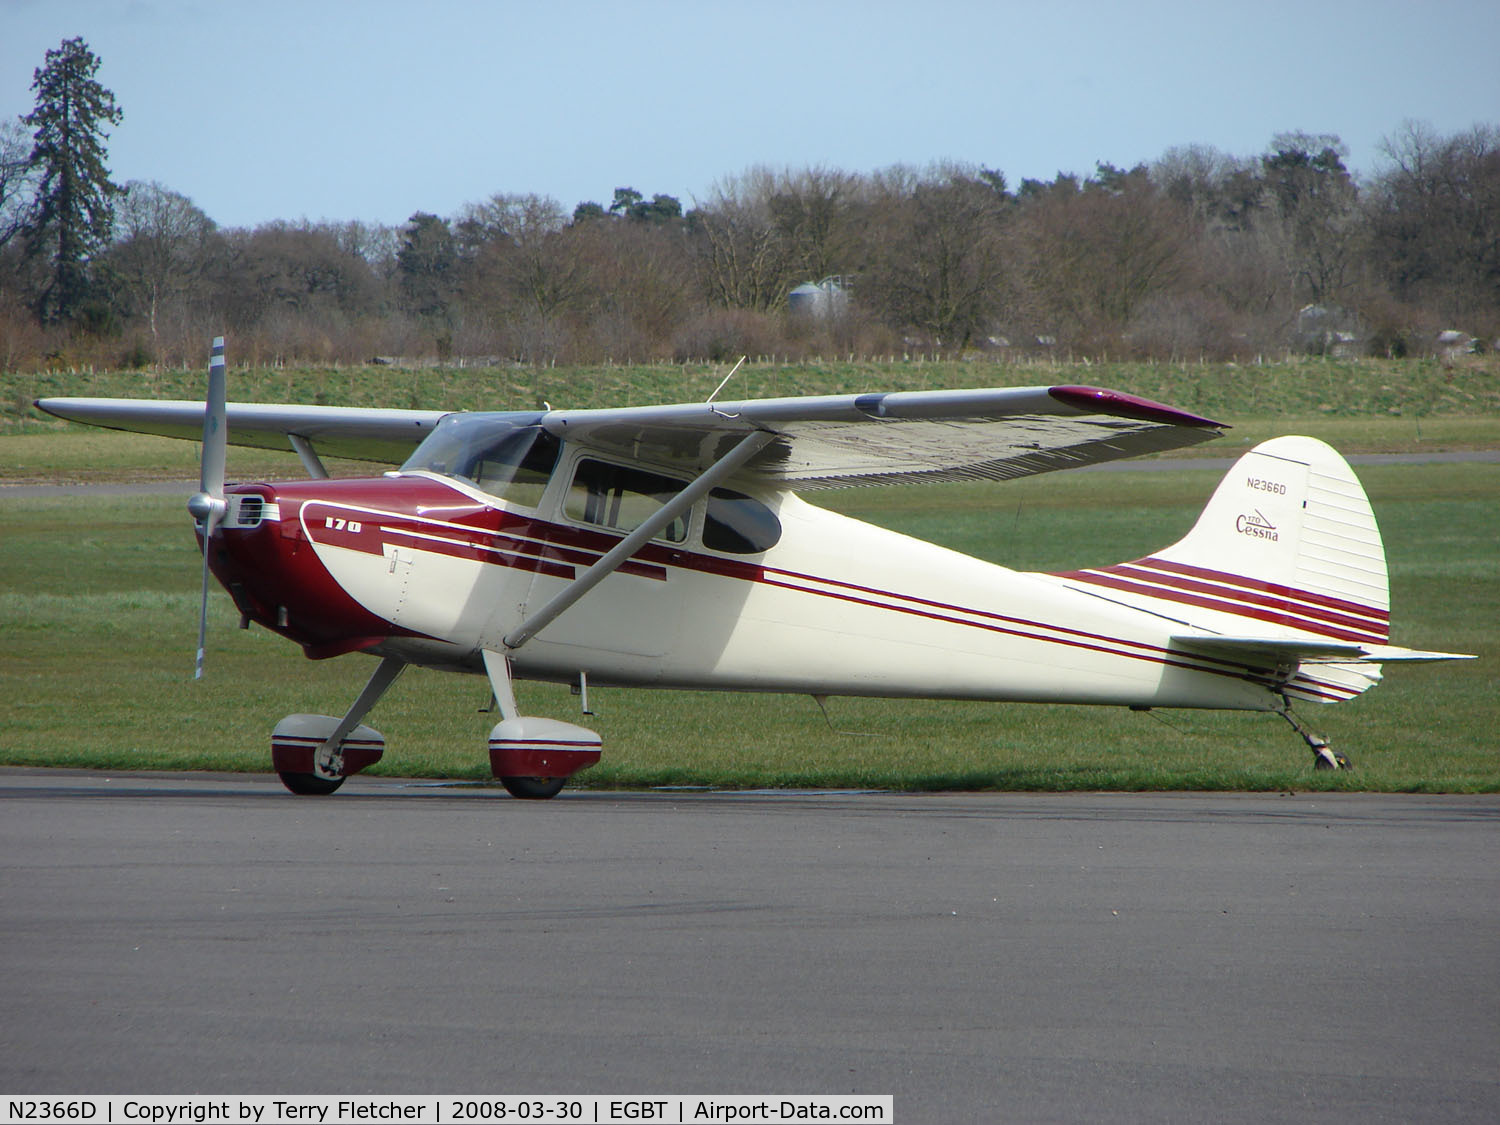 N2366D, 1952 Cessna 170B C/N 20518, The Buckinghamshire airfield at Turweston always has a good variety of aircraft movements